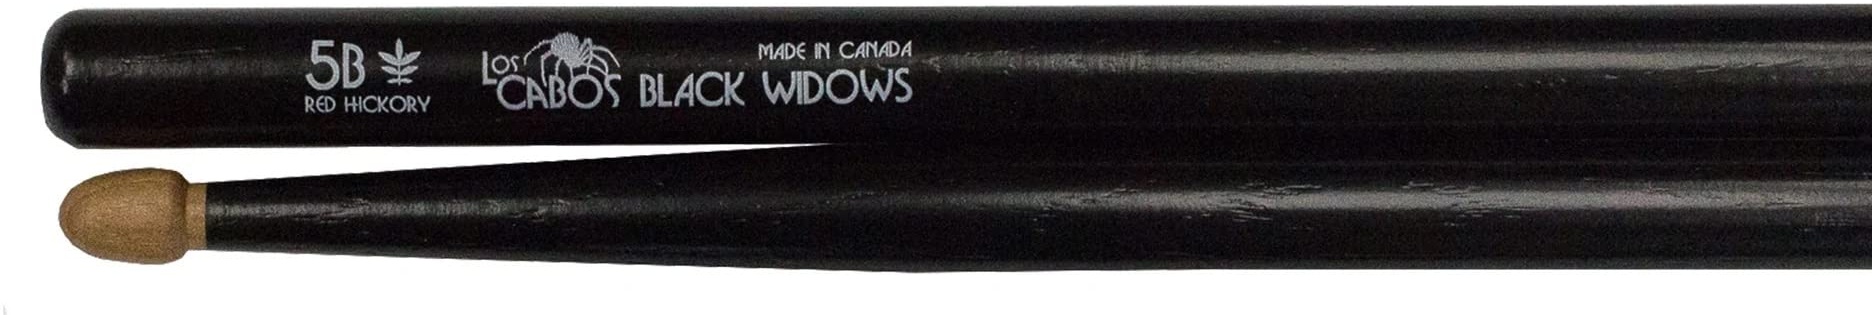 Los Cabos LCD5RHBW 5B Black Widow Red Hickory Wood Tip